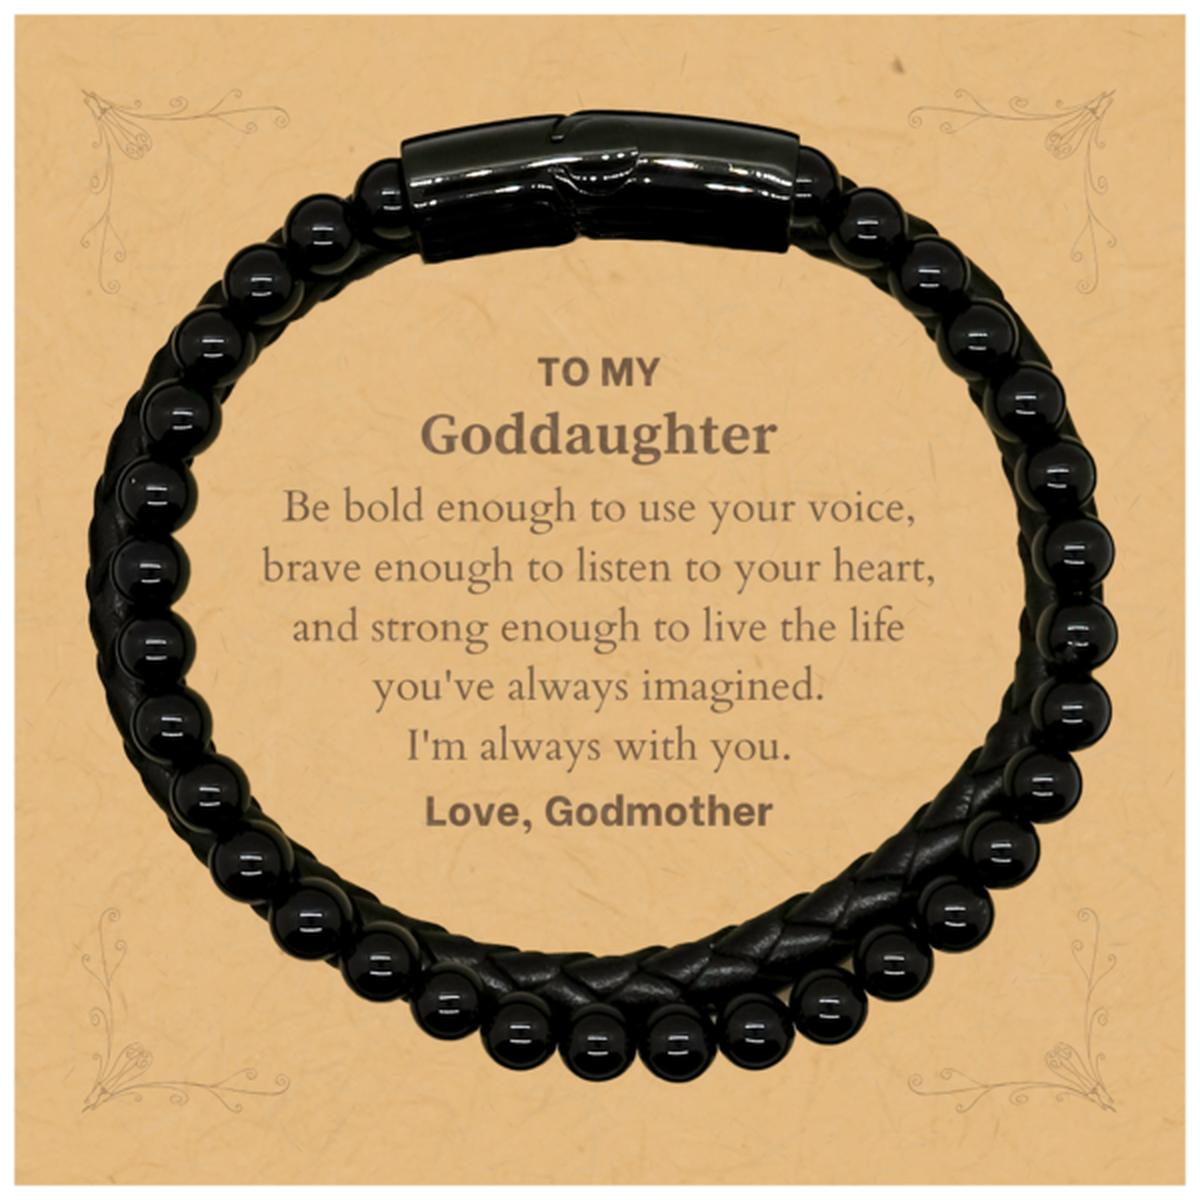 Keepsake Goddaughter Stone Leather Bracelets Gift Idea Graduation Christmas Birthday Goddaughter from Godmother, Goddaughter Be bold enough to use your voice, brave enough to listen to your heart. Love, Godmother